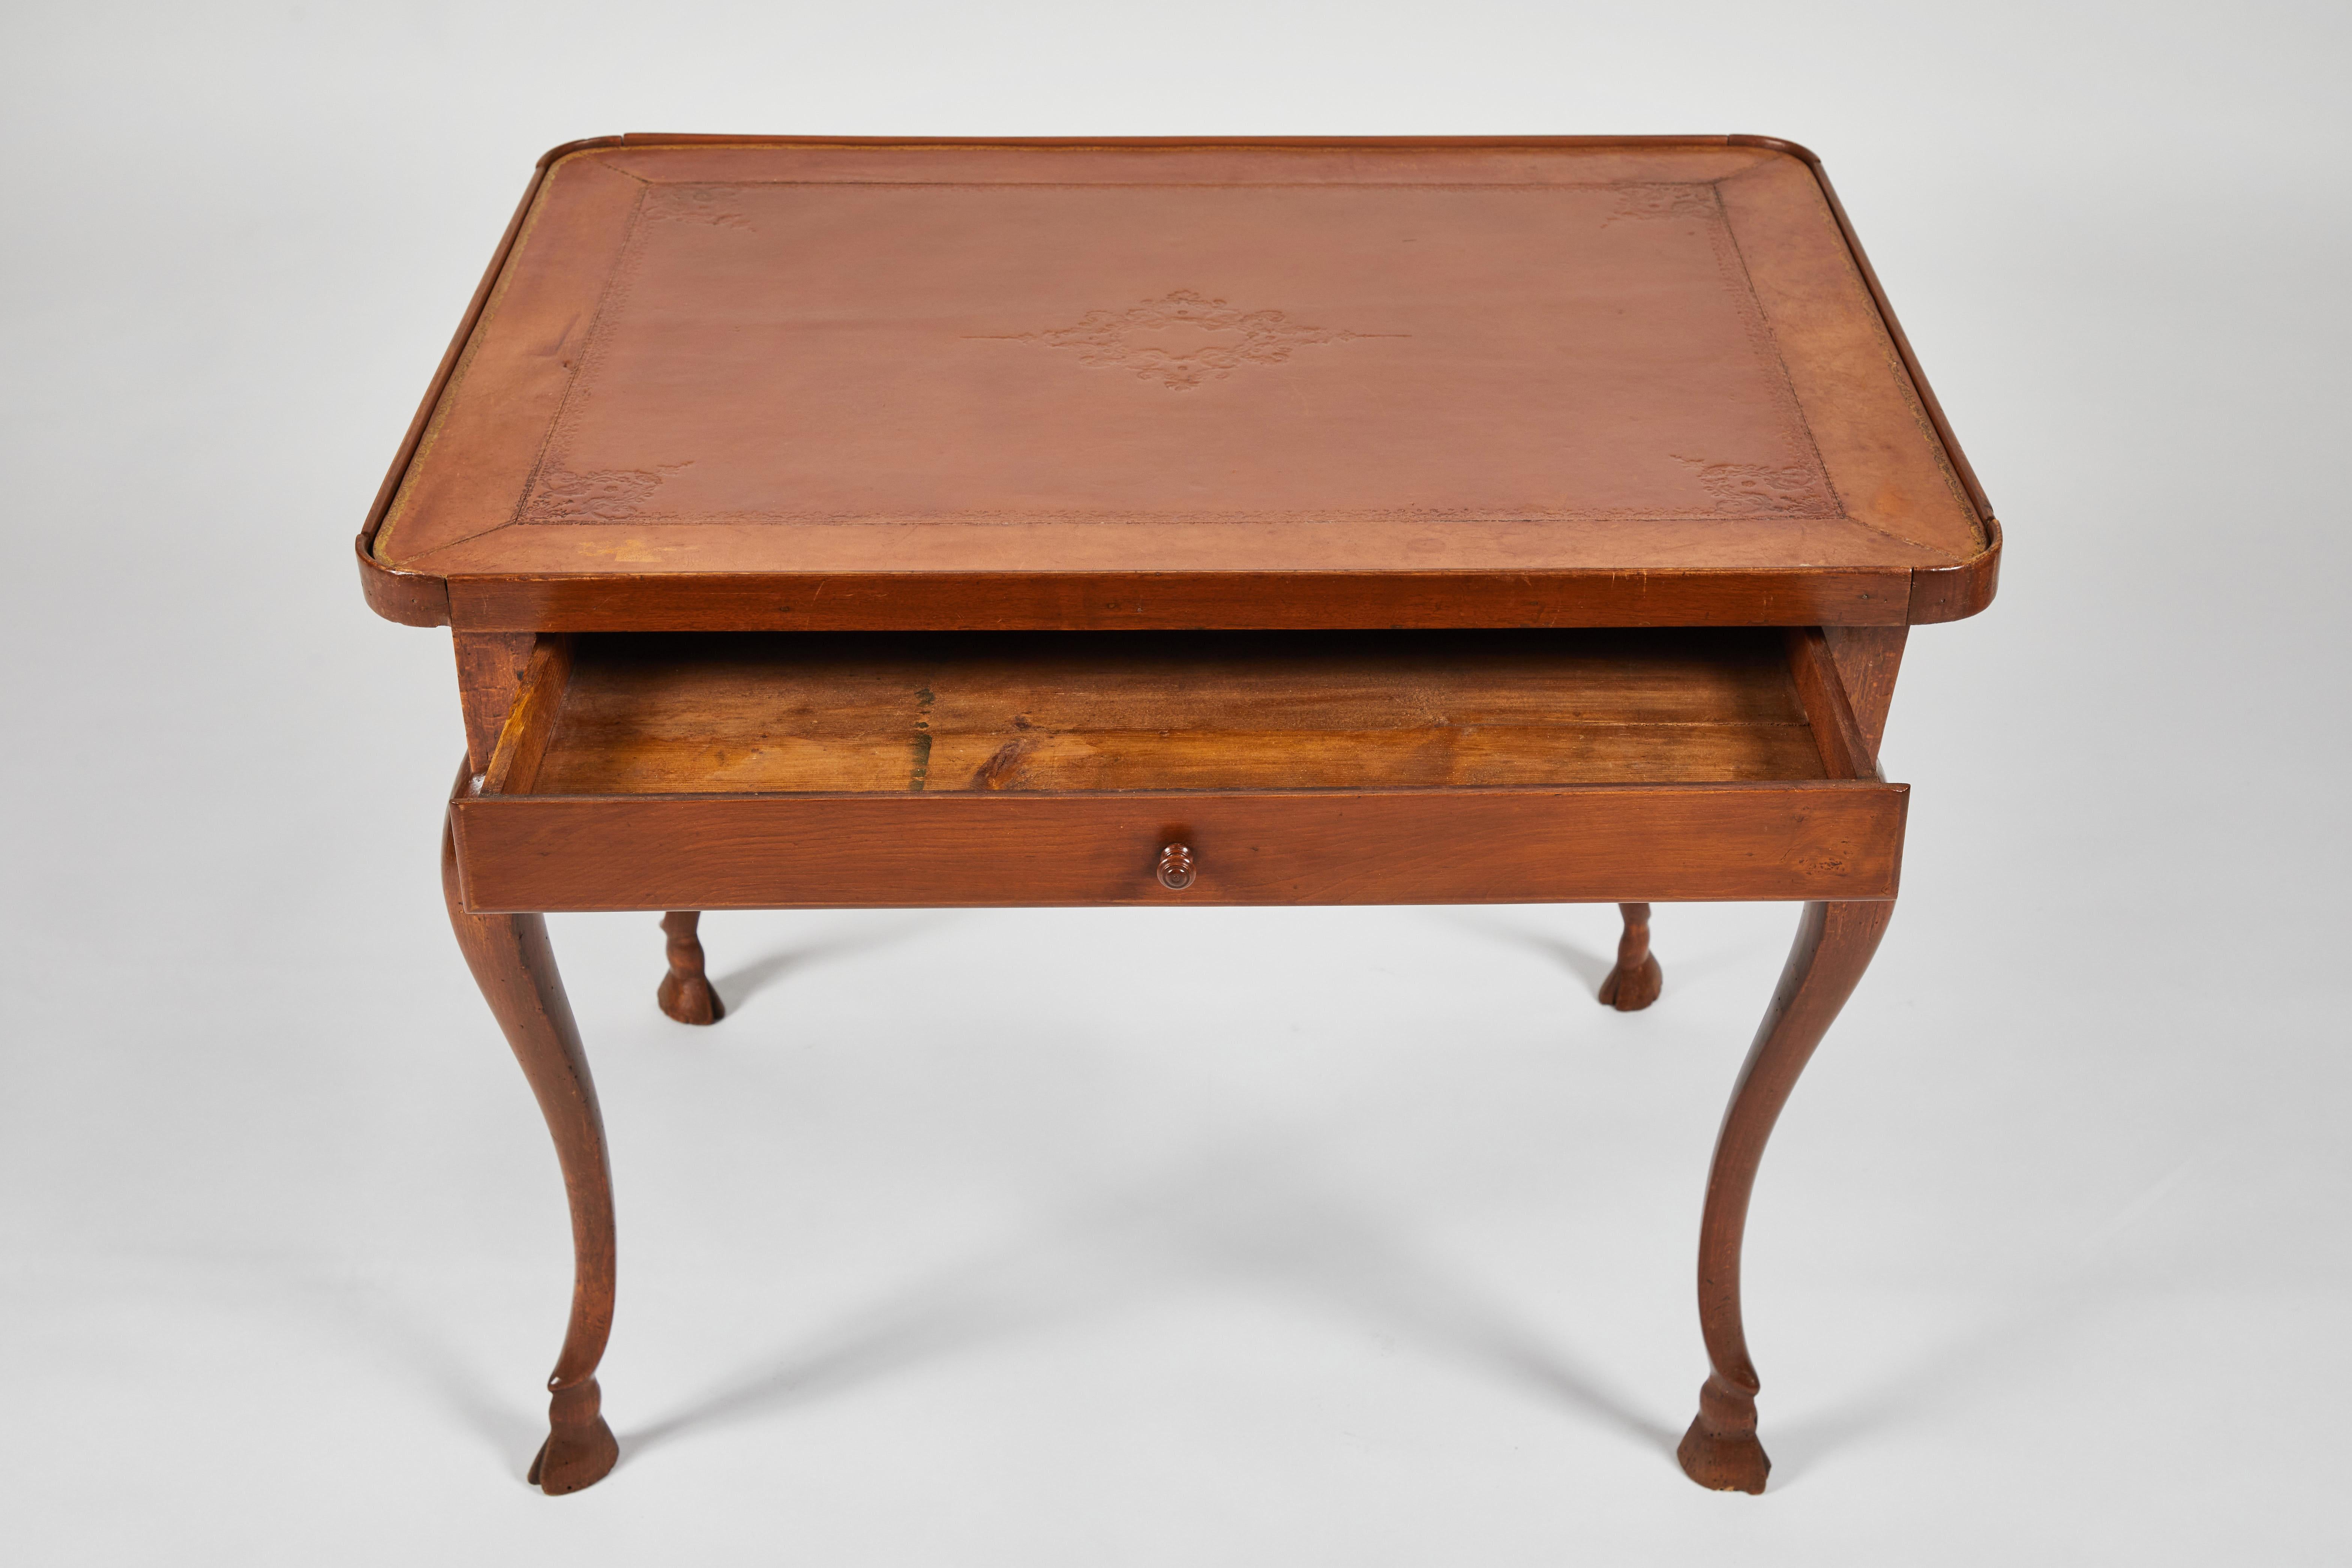 Early 19th Century Continental Rococo Style Walnut Leather Top Writing Table For Sale 2